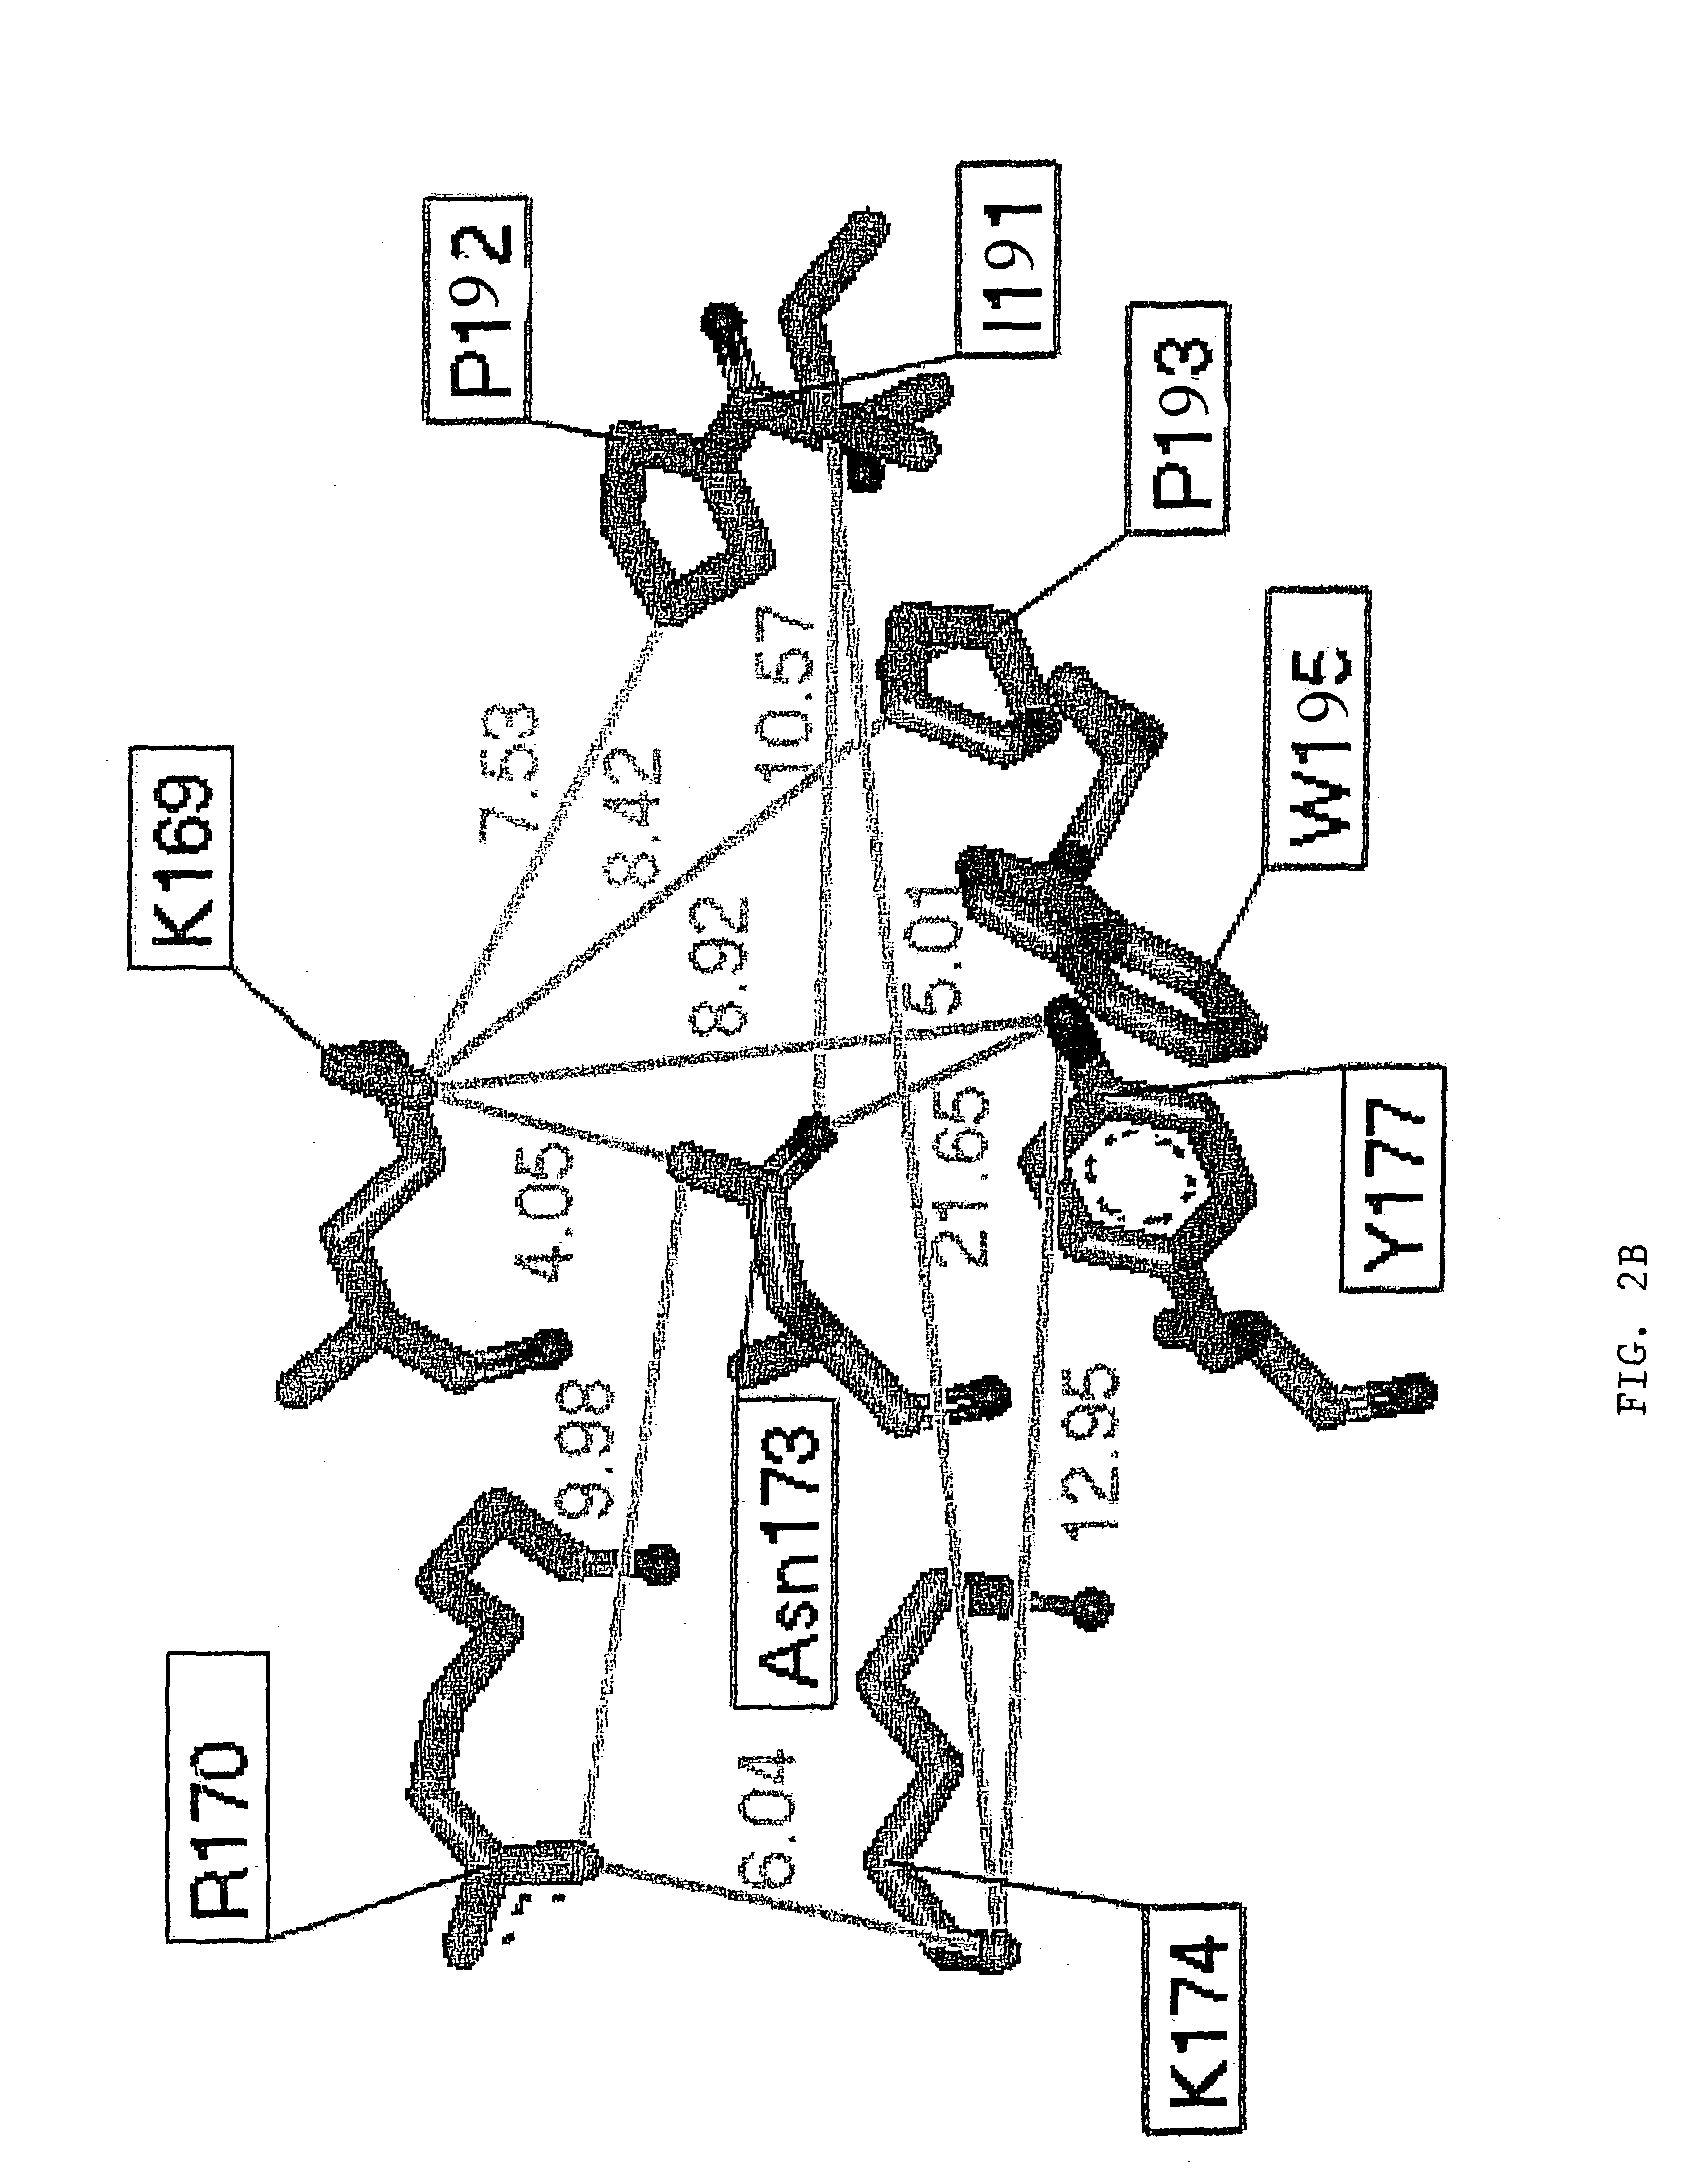 Method of inhibiting pathogenicity of infectious agents